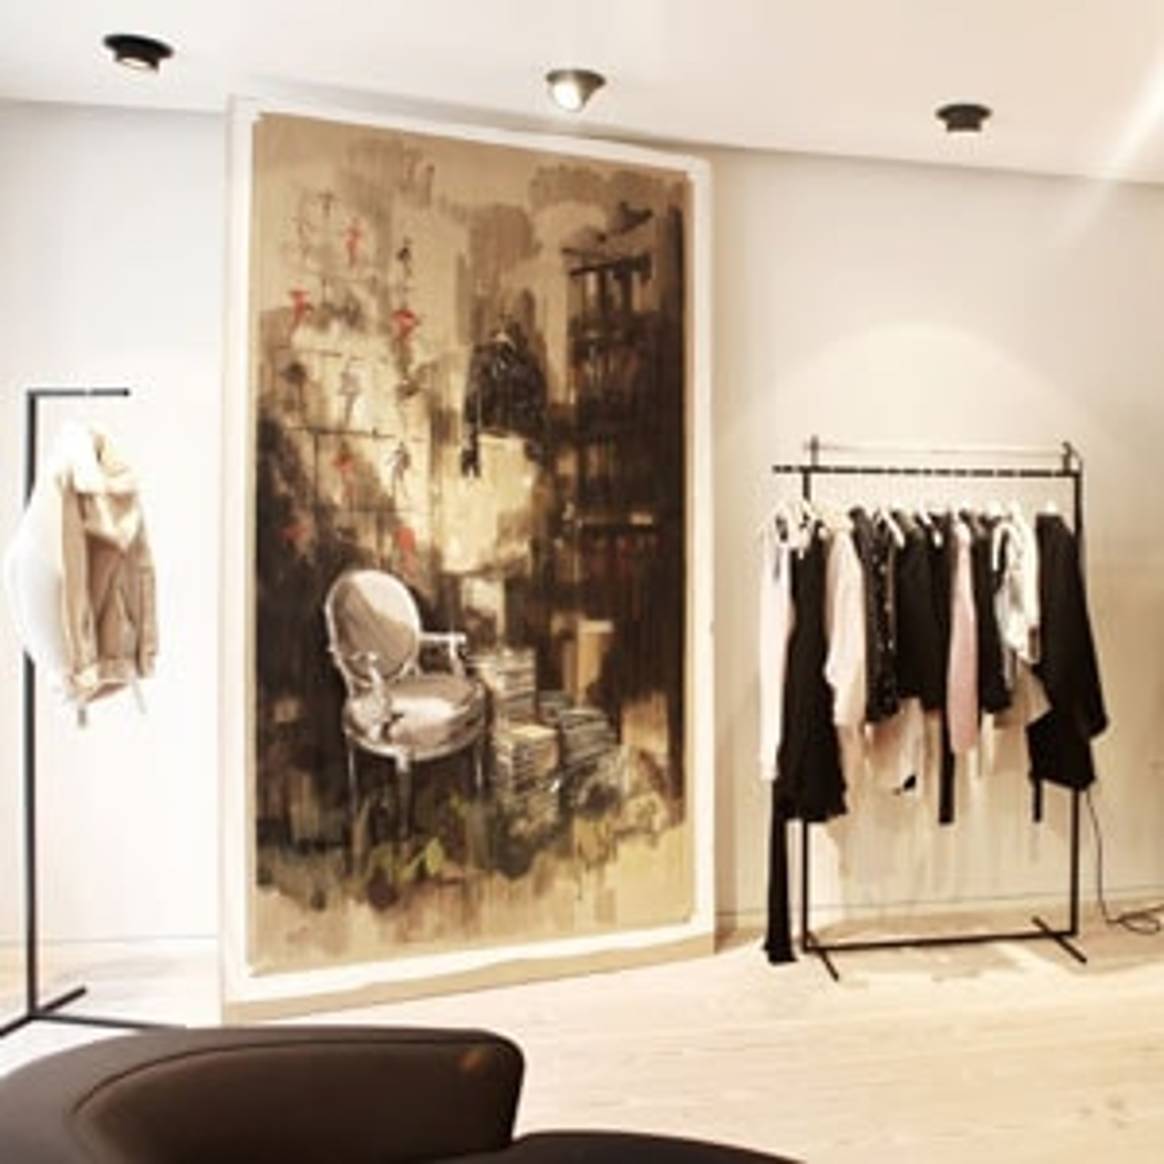 Acne opens for business in London